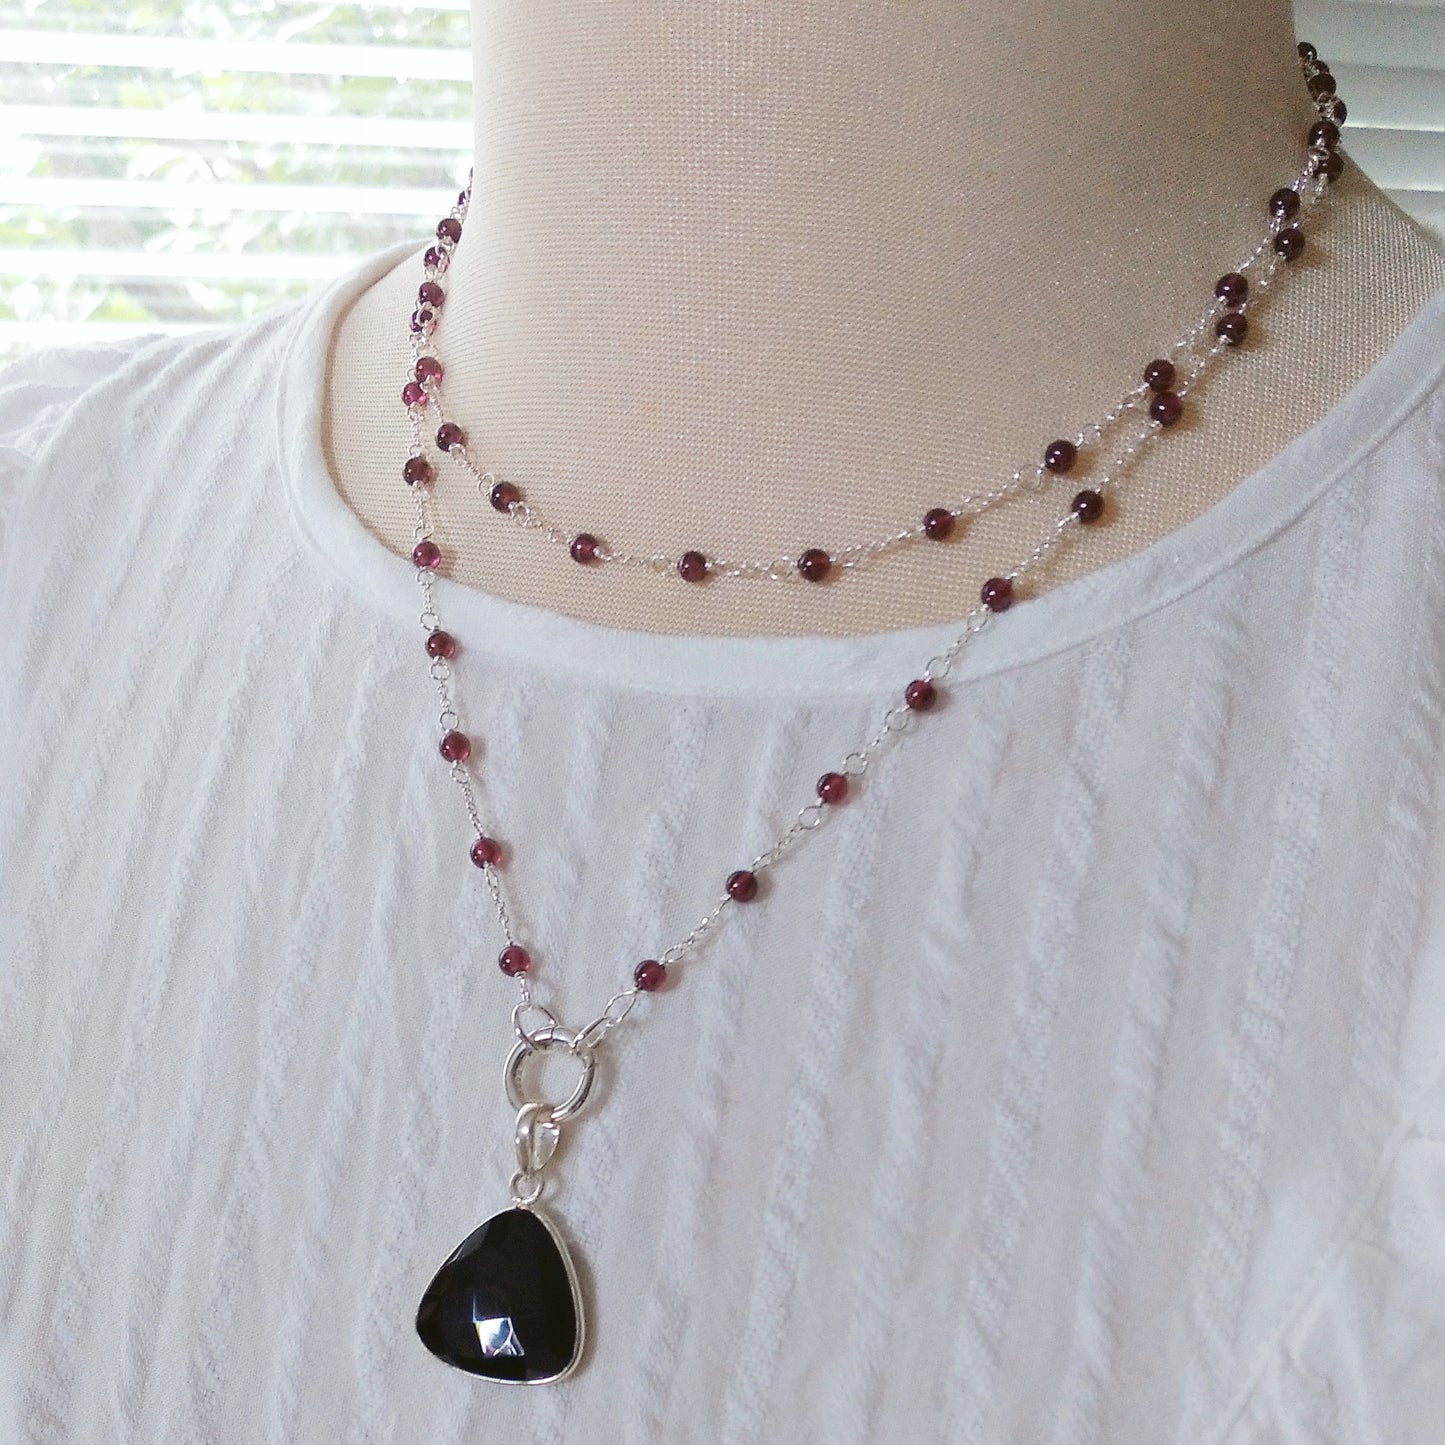 Triangular Black Onyx Facetted Pendant Charm